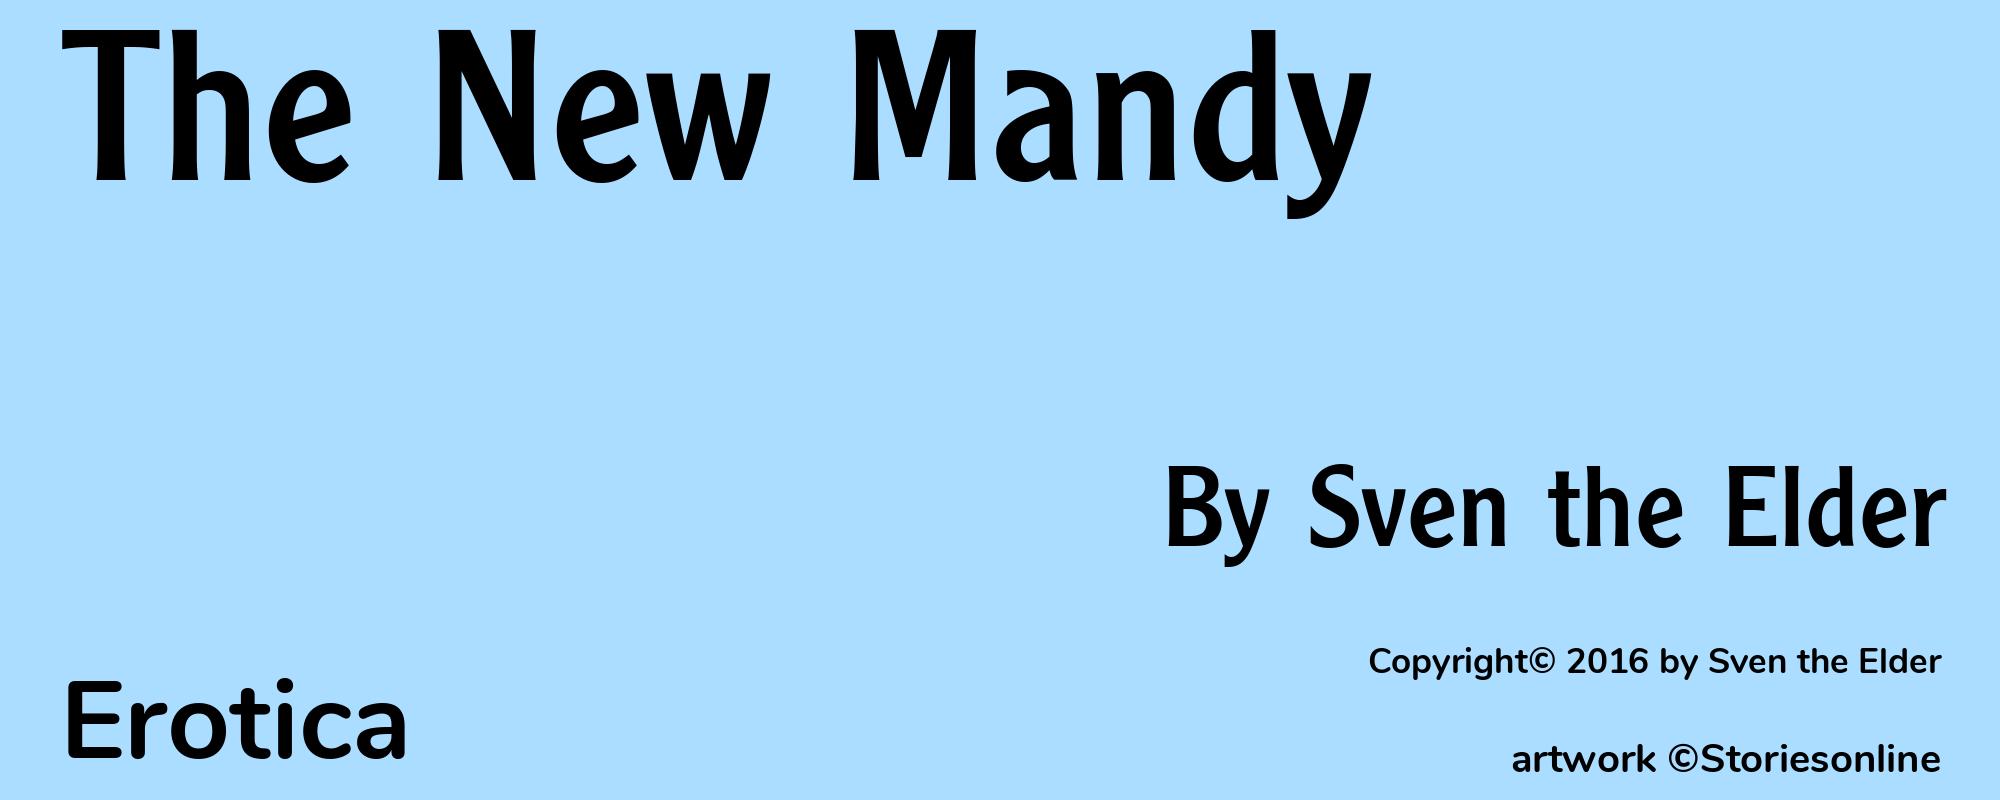 The New Mandy - Cover